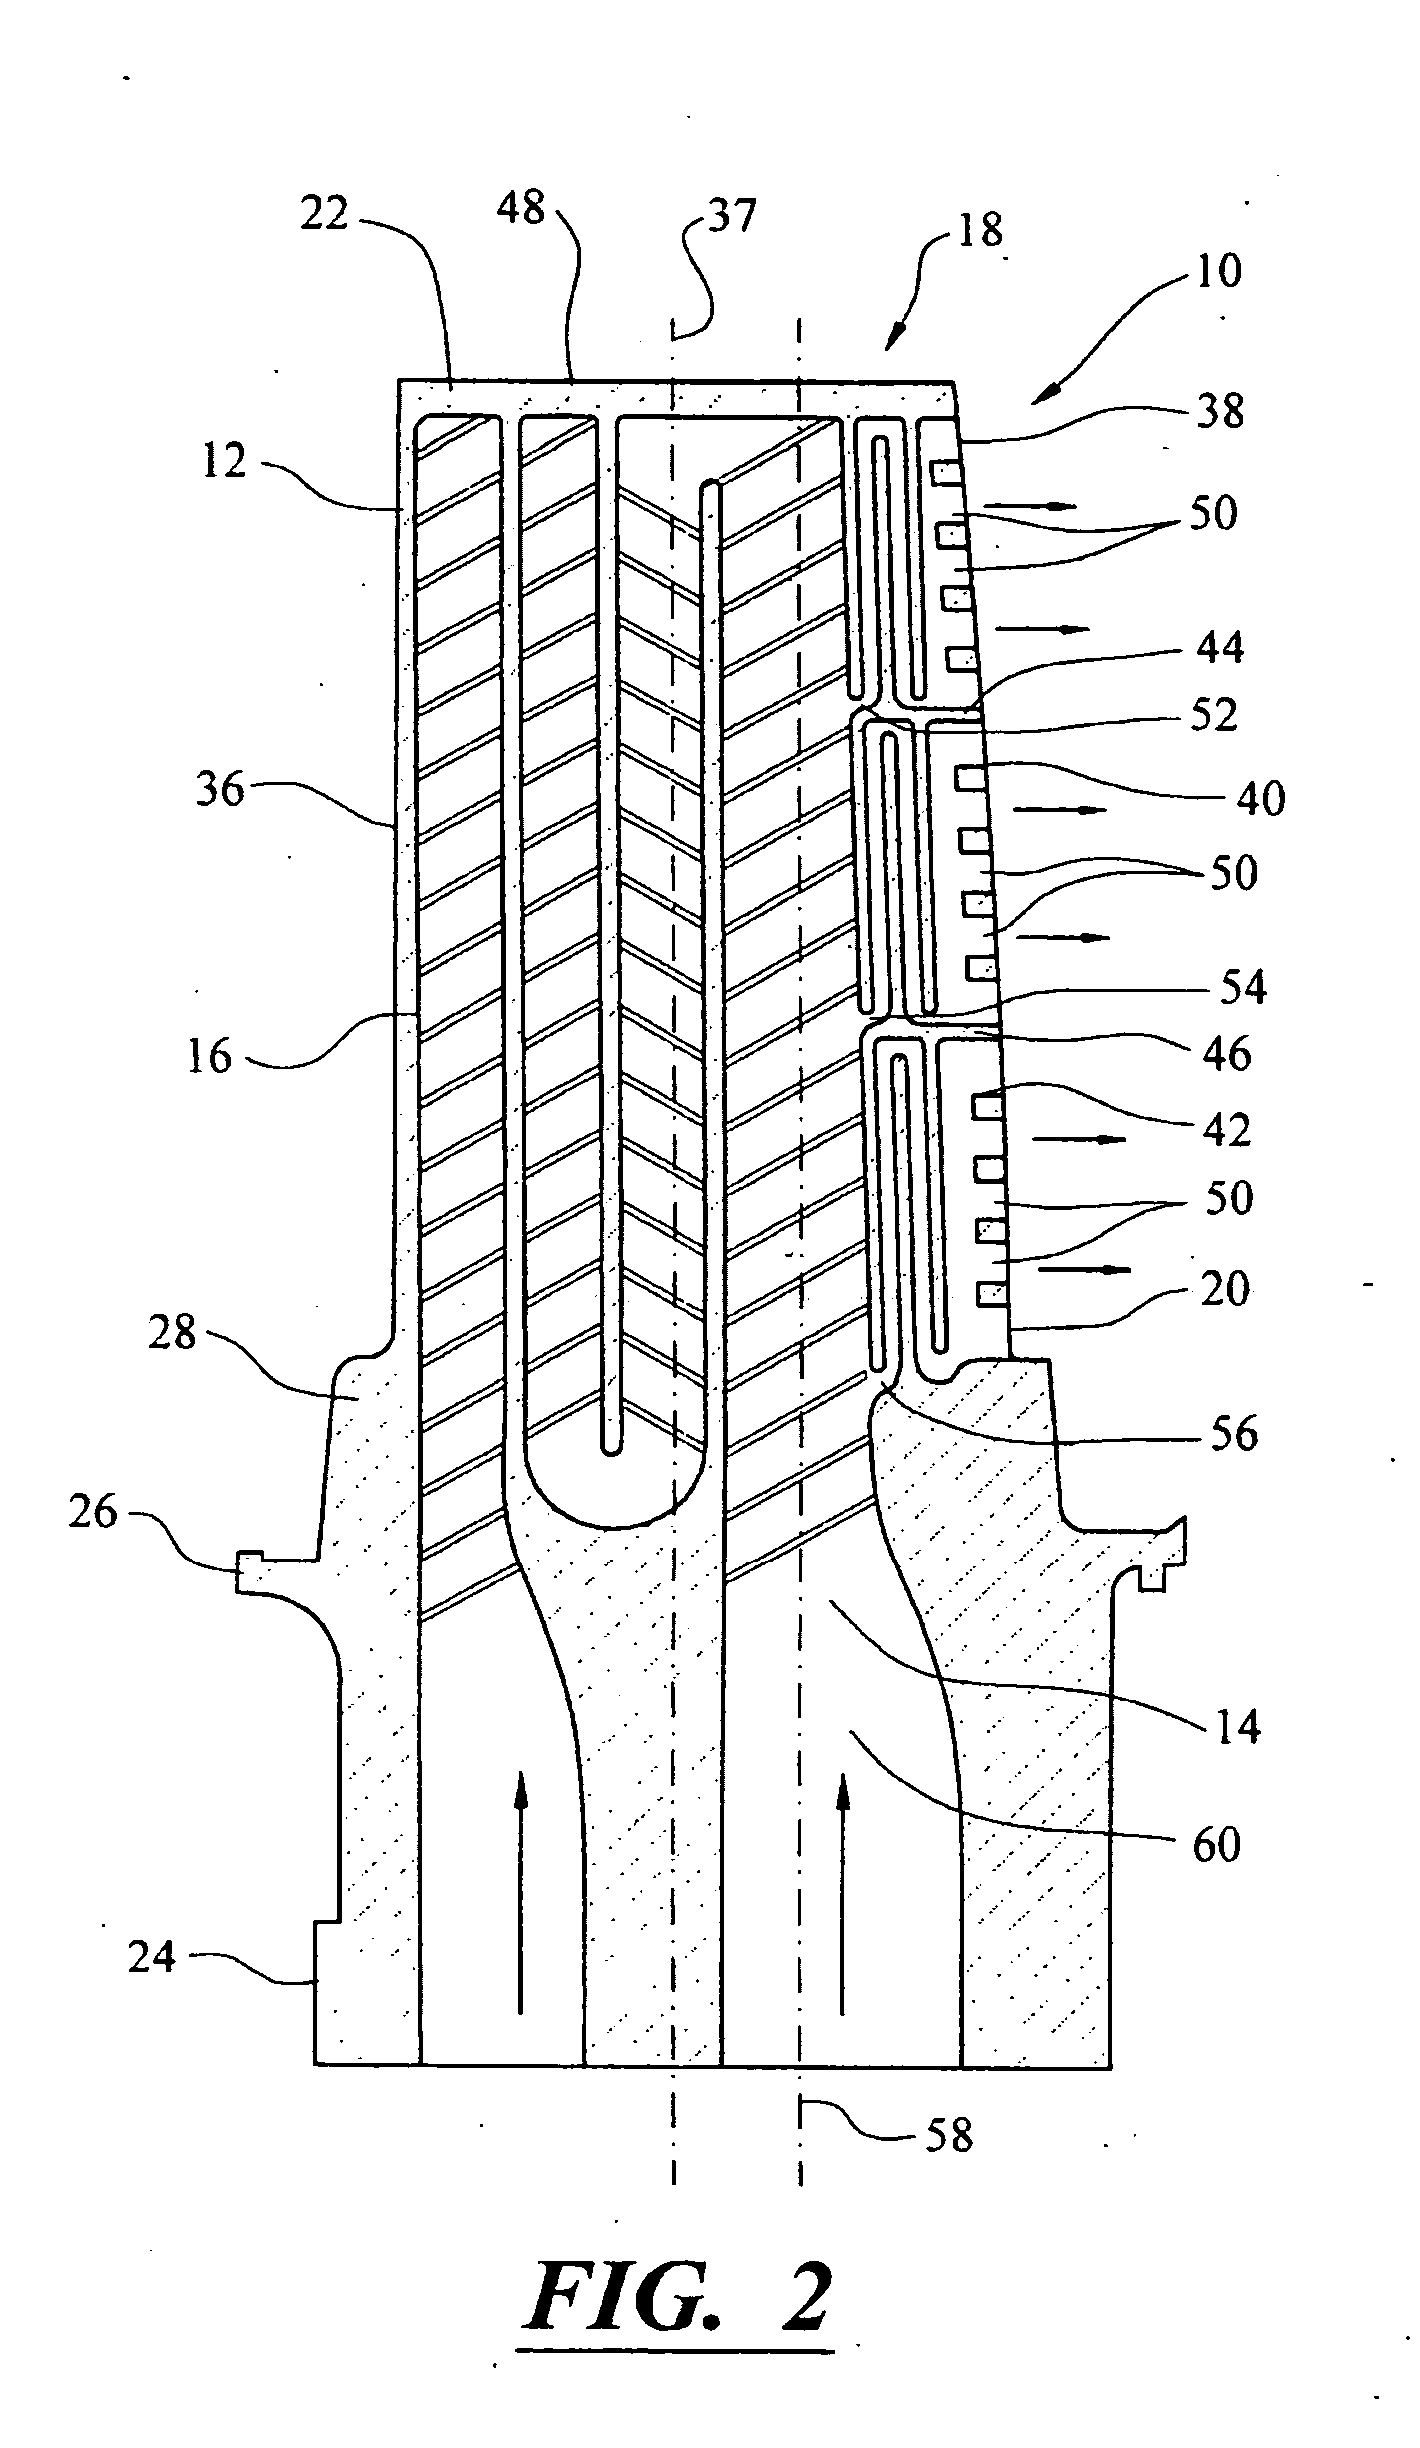 Turbine blade cooling system having multiple serpentine trailing edge cooling channels